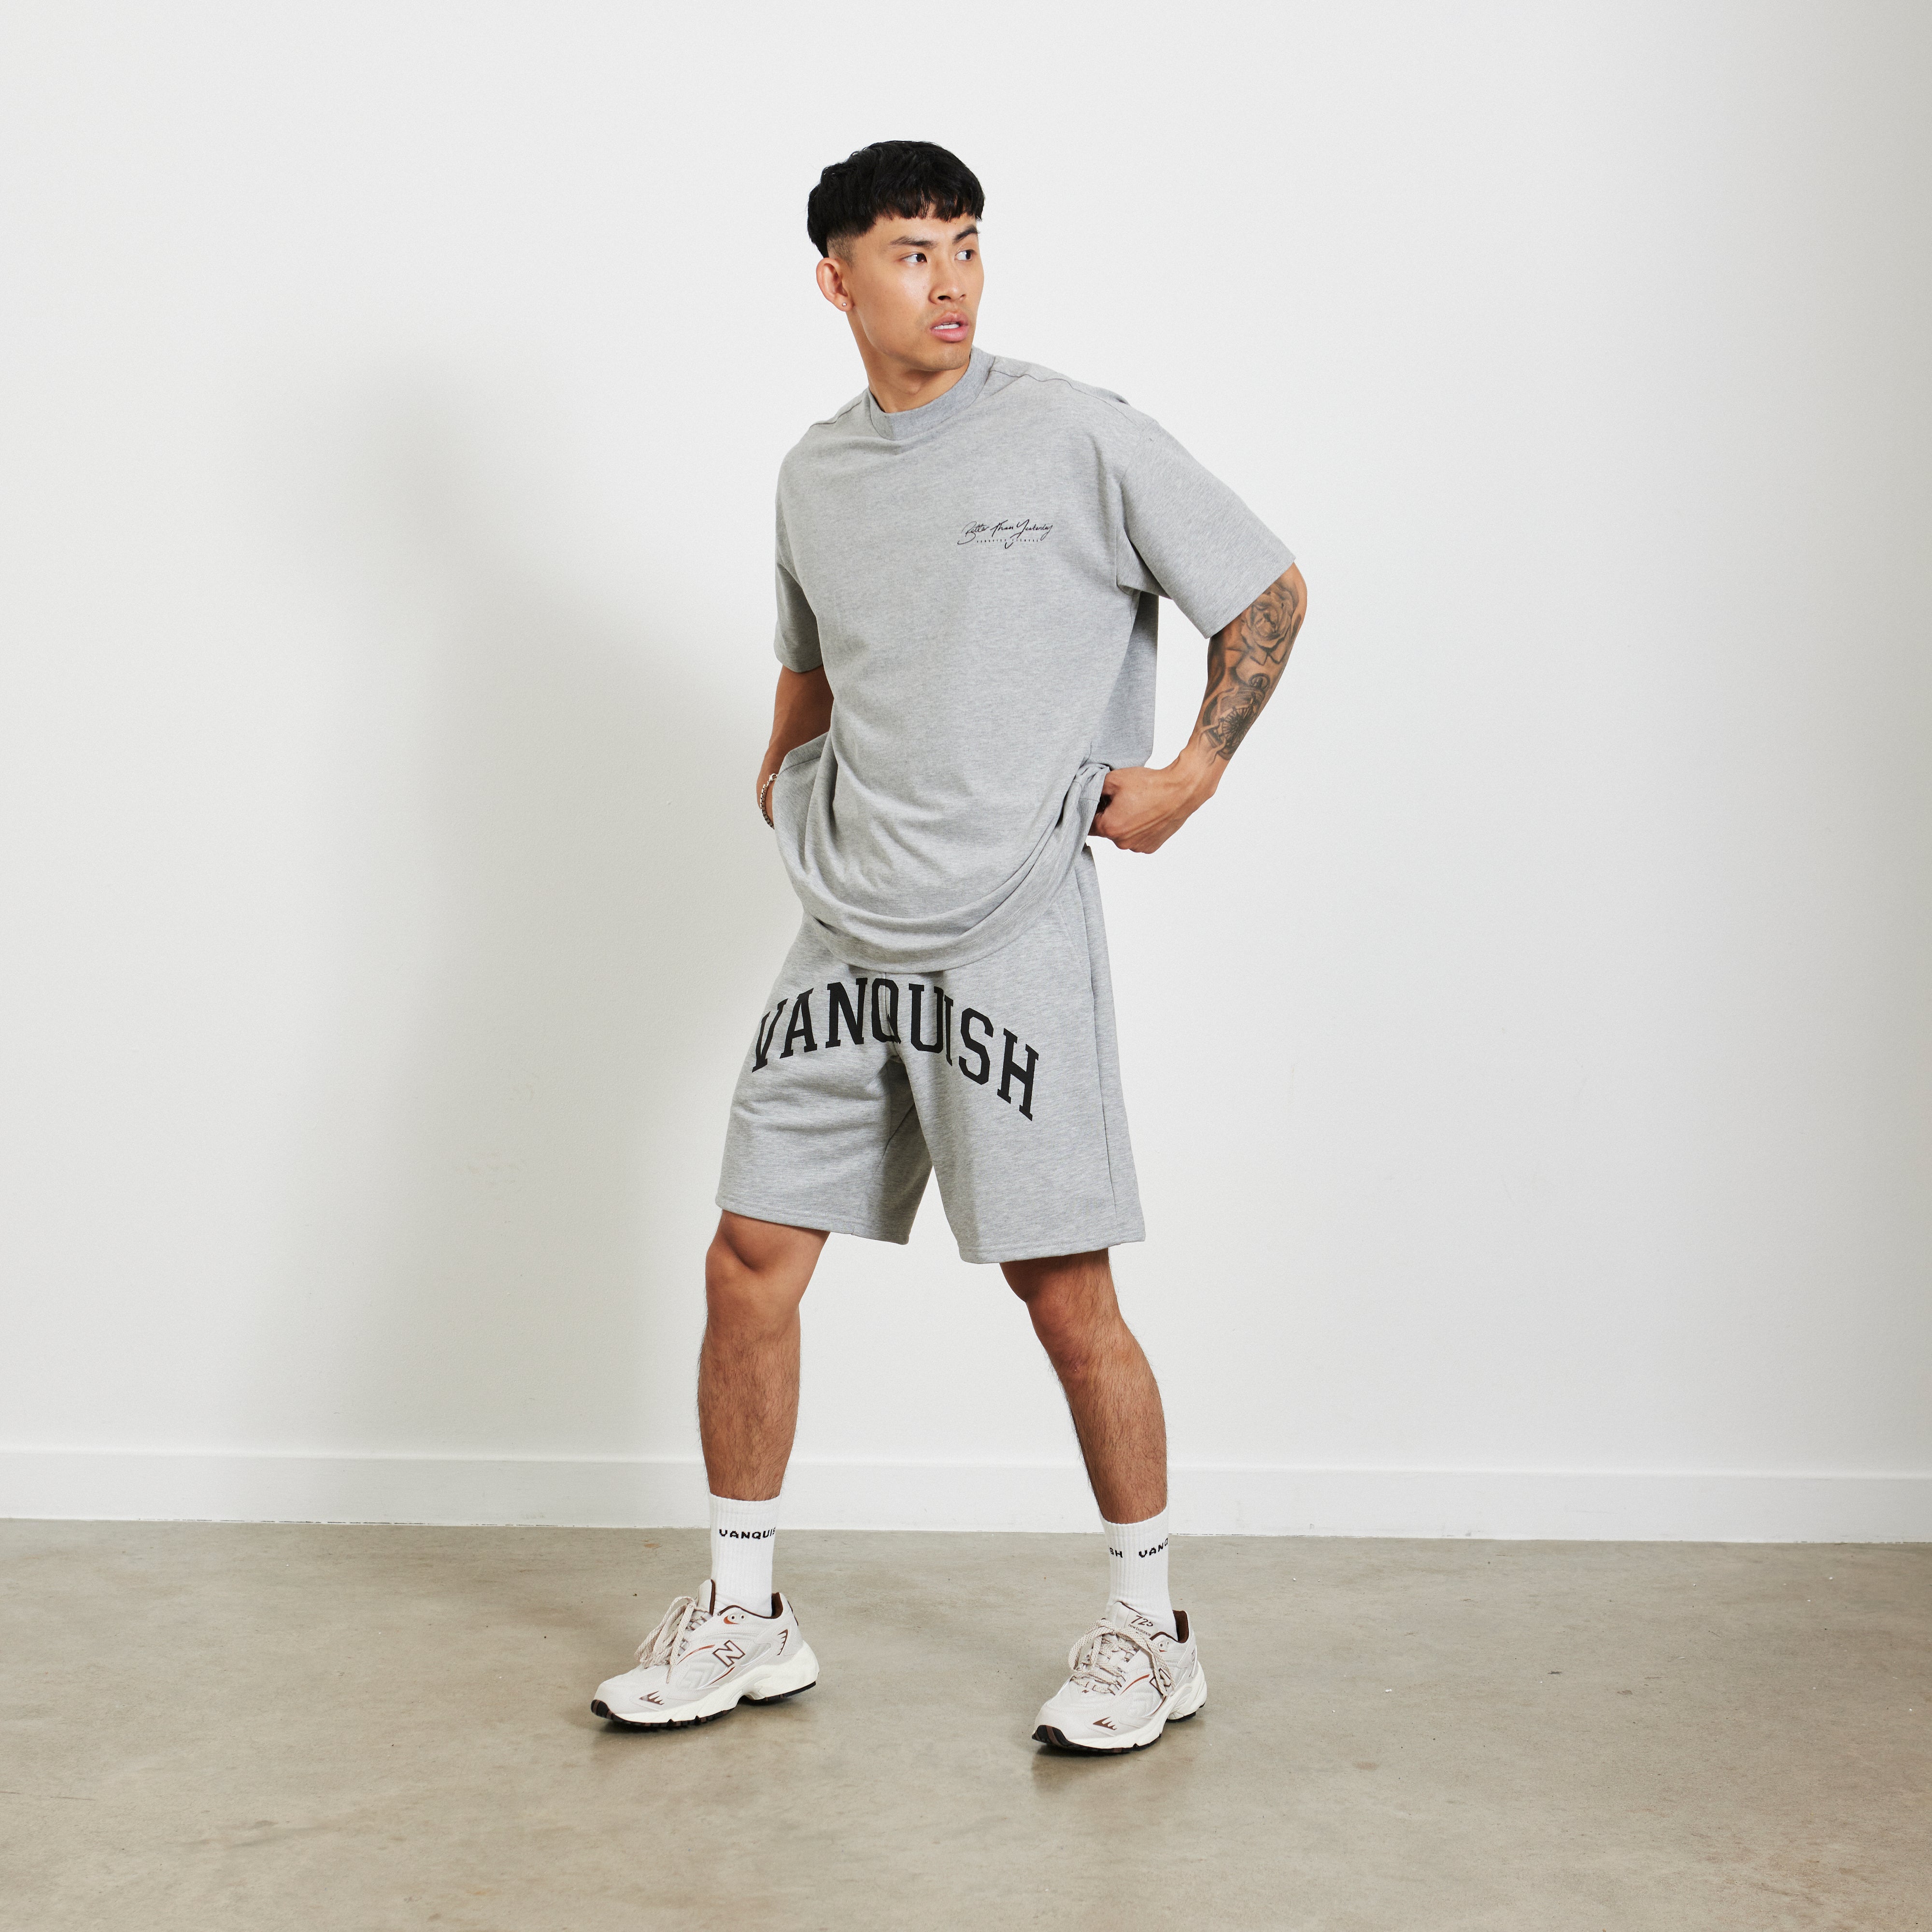 Vanquish Better Than Yesterday Heather Grey Relaxed Fit Shorts